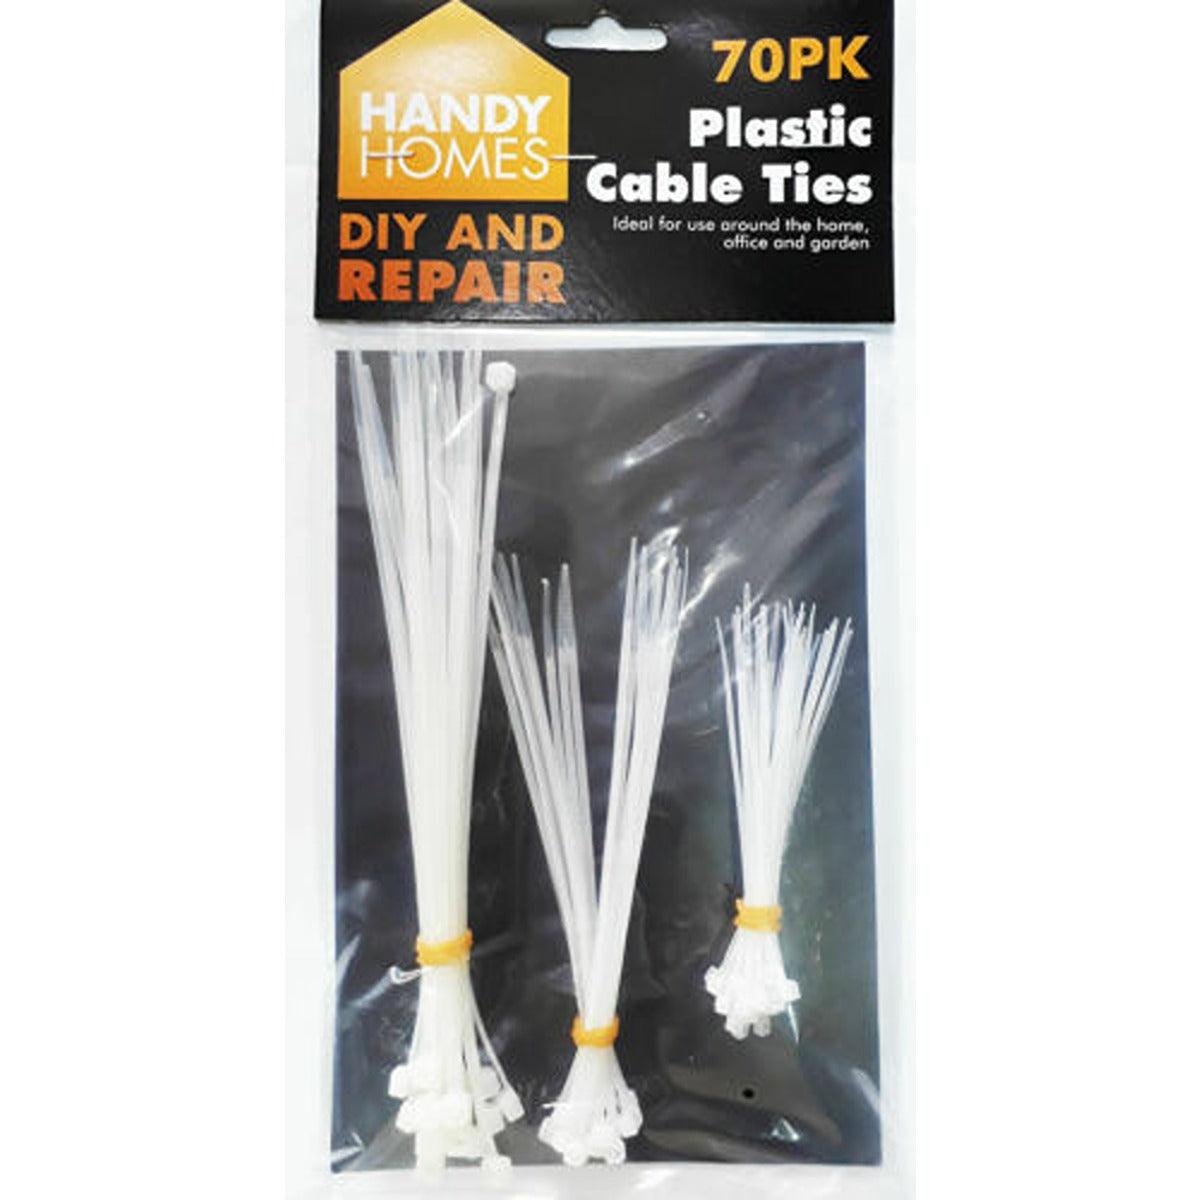 Keep It Handy - Plastic Cable Ties - 70 Pack - Continental Food Store